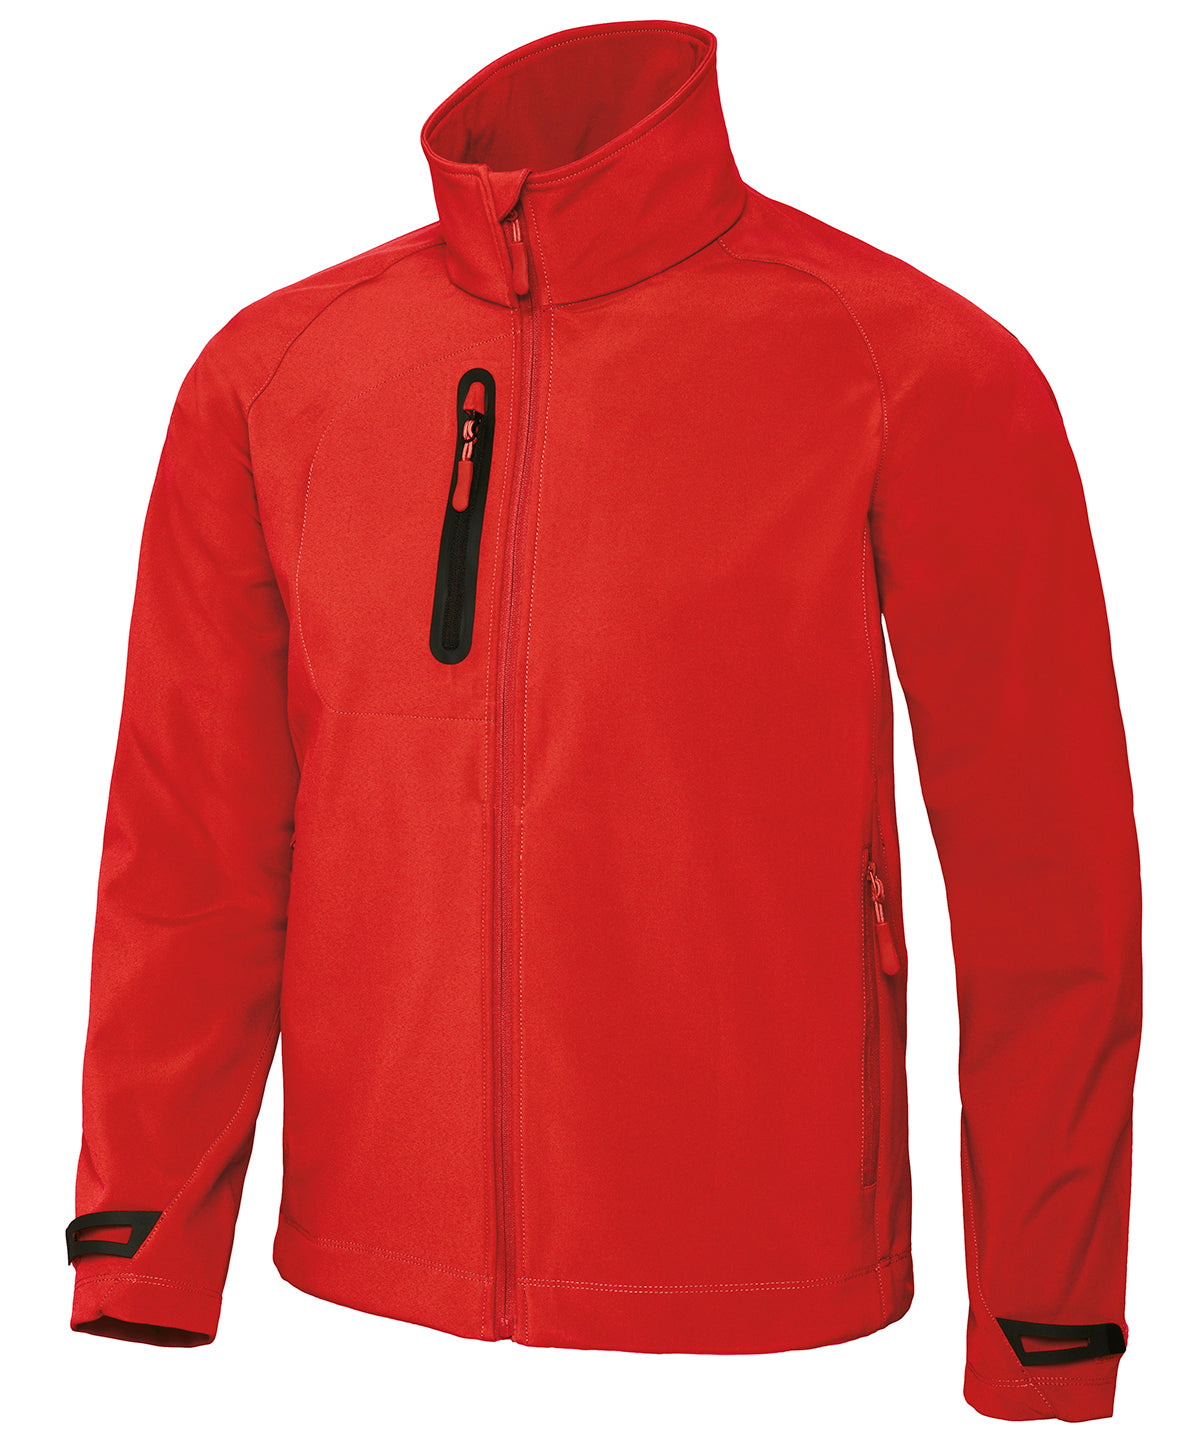 Personalised Jackets - Mid Red B&C Collection B&C X-Lite softshell /men